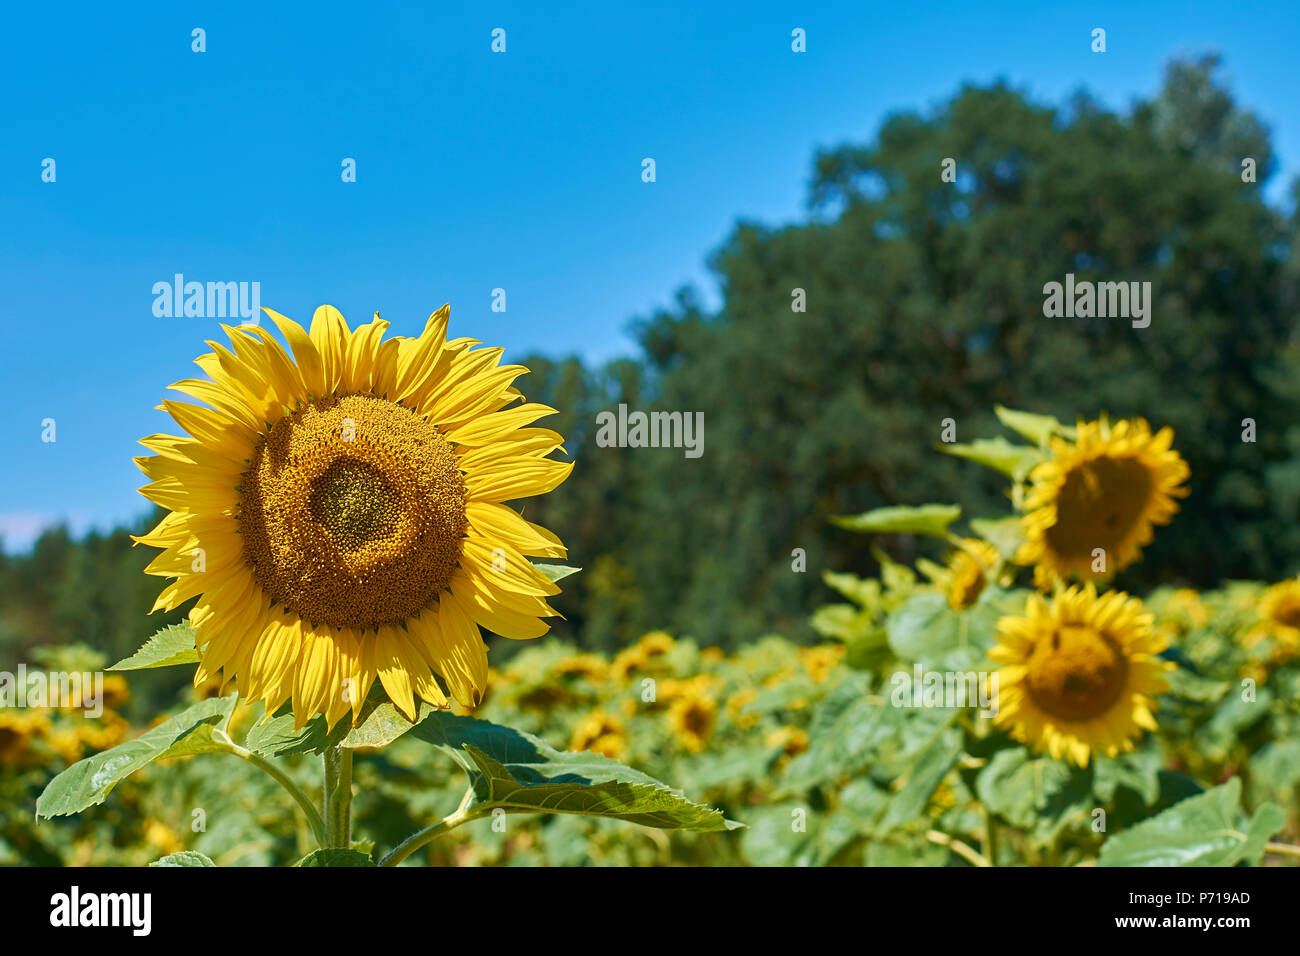 Flower of a sunflower with blue sky and blurred trees in the background Stock Photo